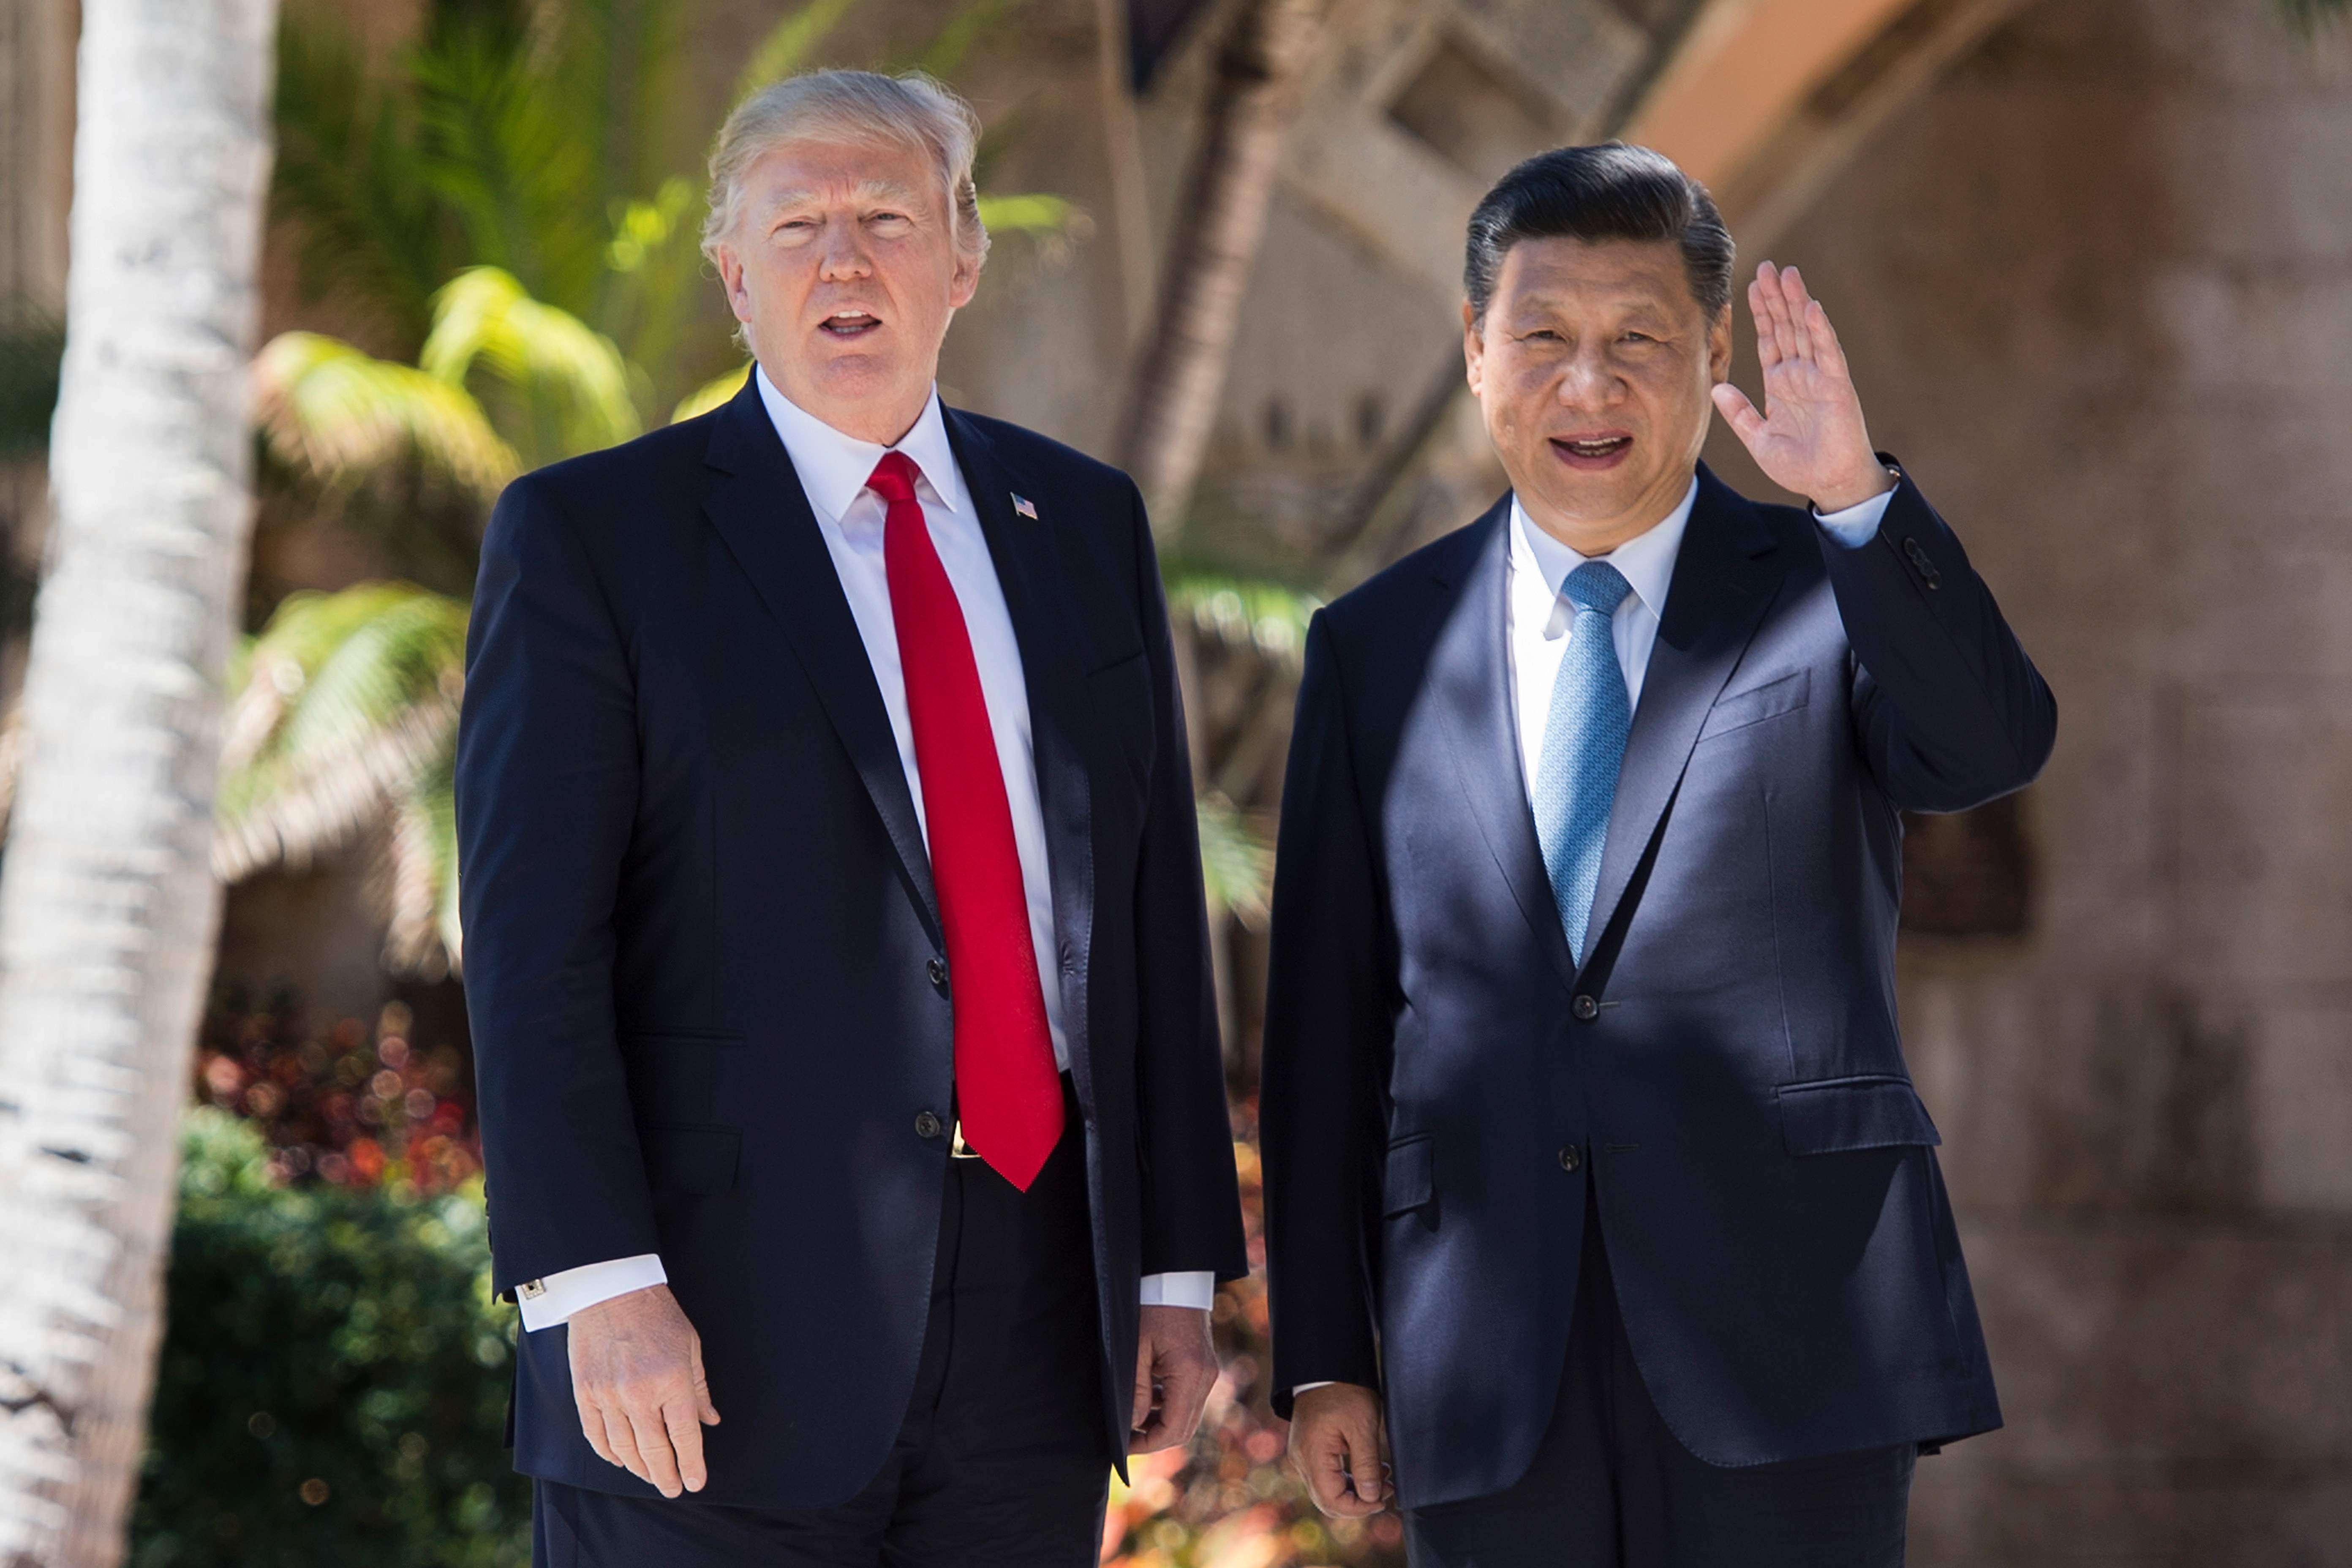 Talks between Chinese President Xi Jinping and US President Donald Trump at the Mar-a-Lago estate in West Palm Beach, Florida, on Thursday and Friday have put bilateral ties back on track. Photo: AFP